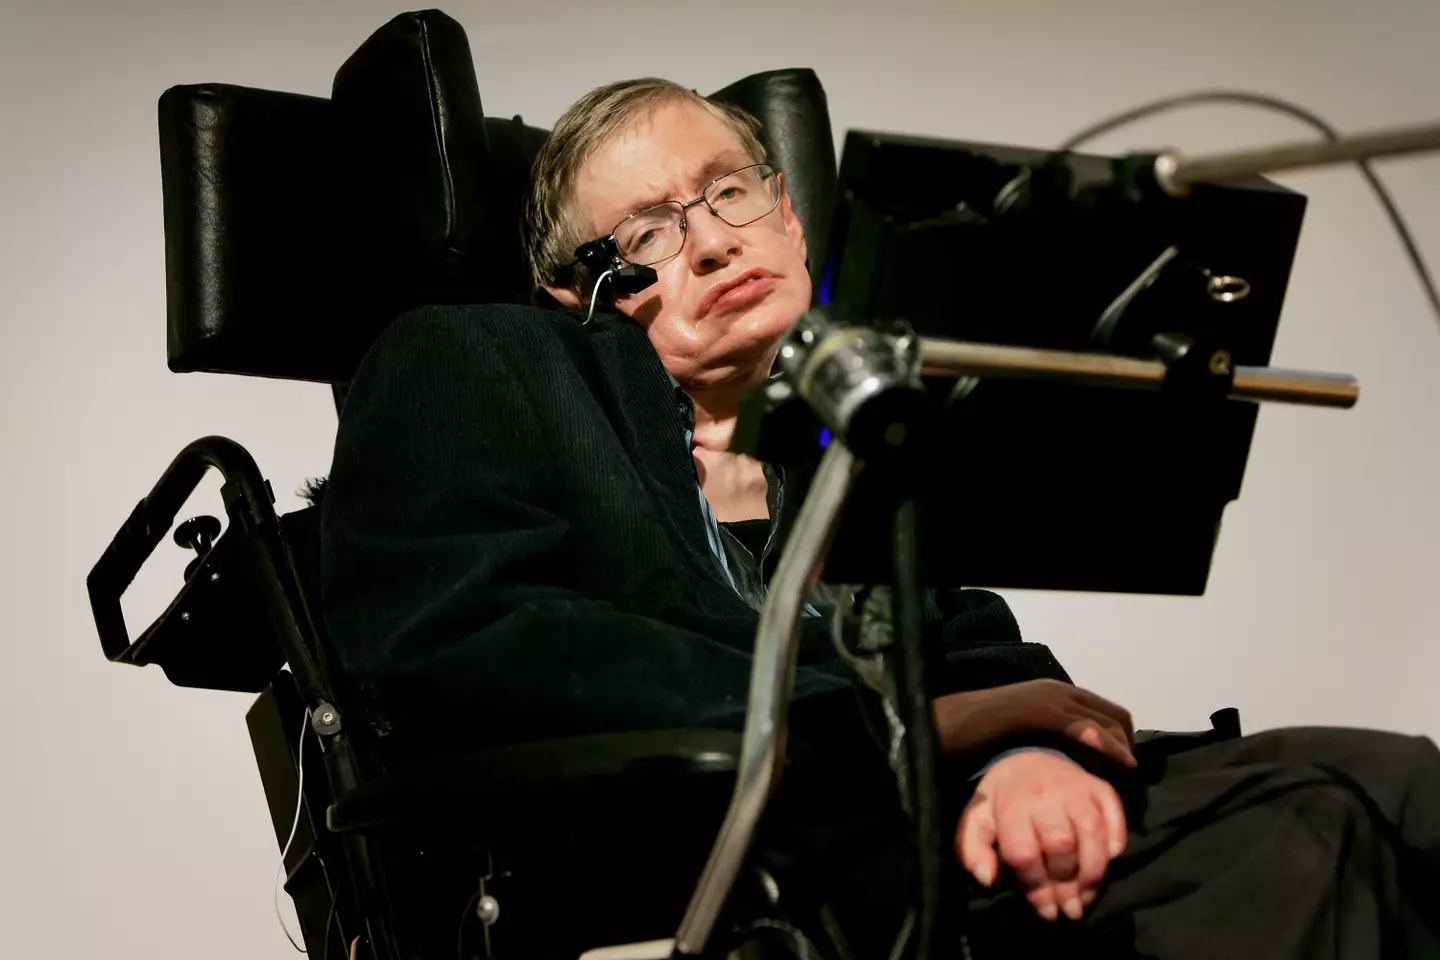 Stephen Hawking Issued A Final Warning To Humanity Before His Passing